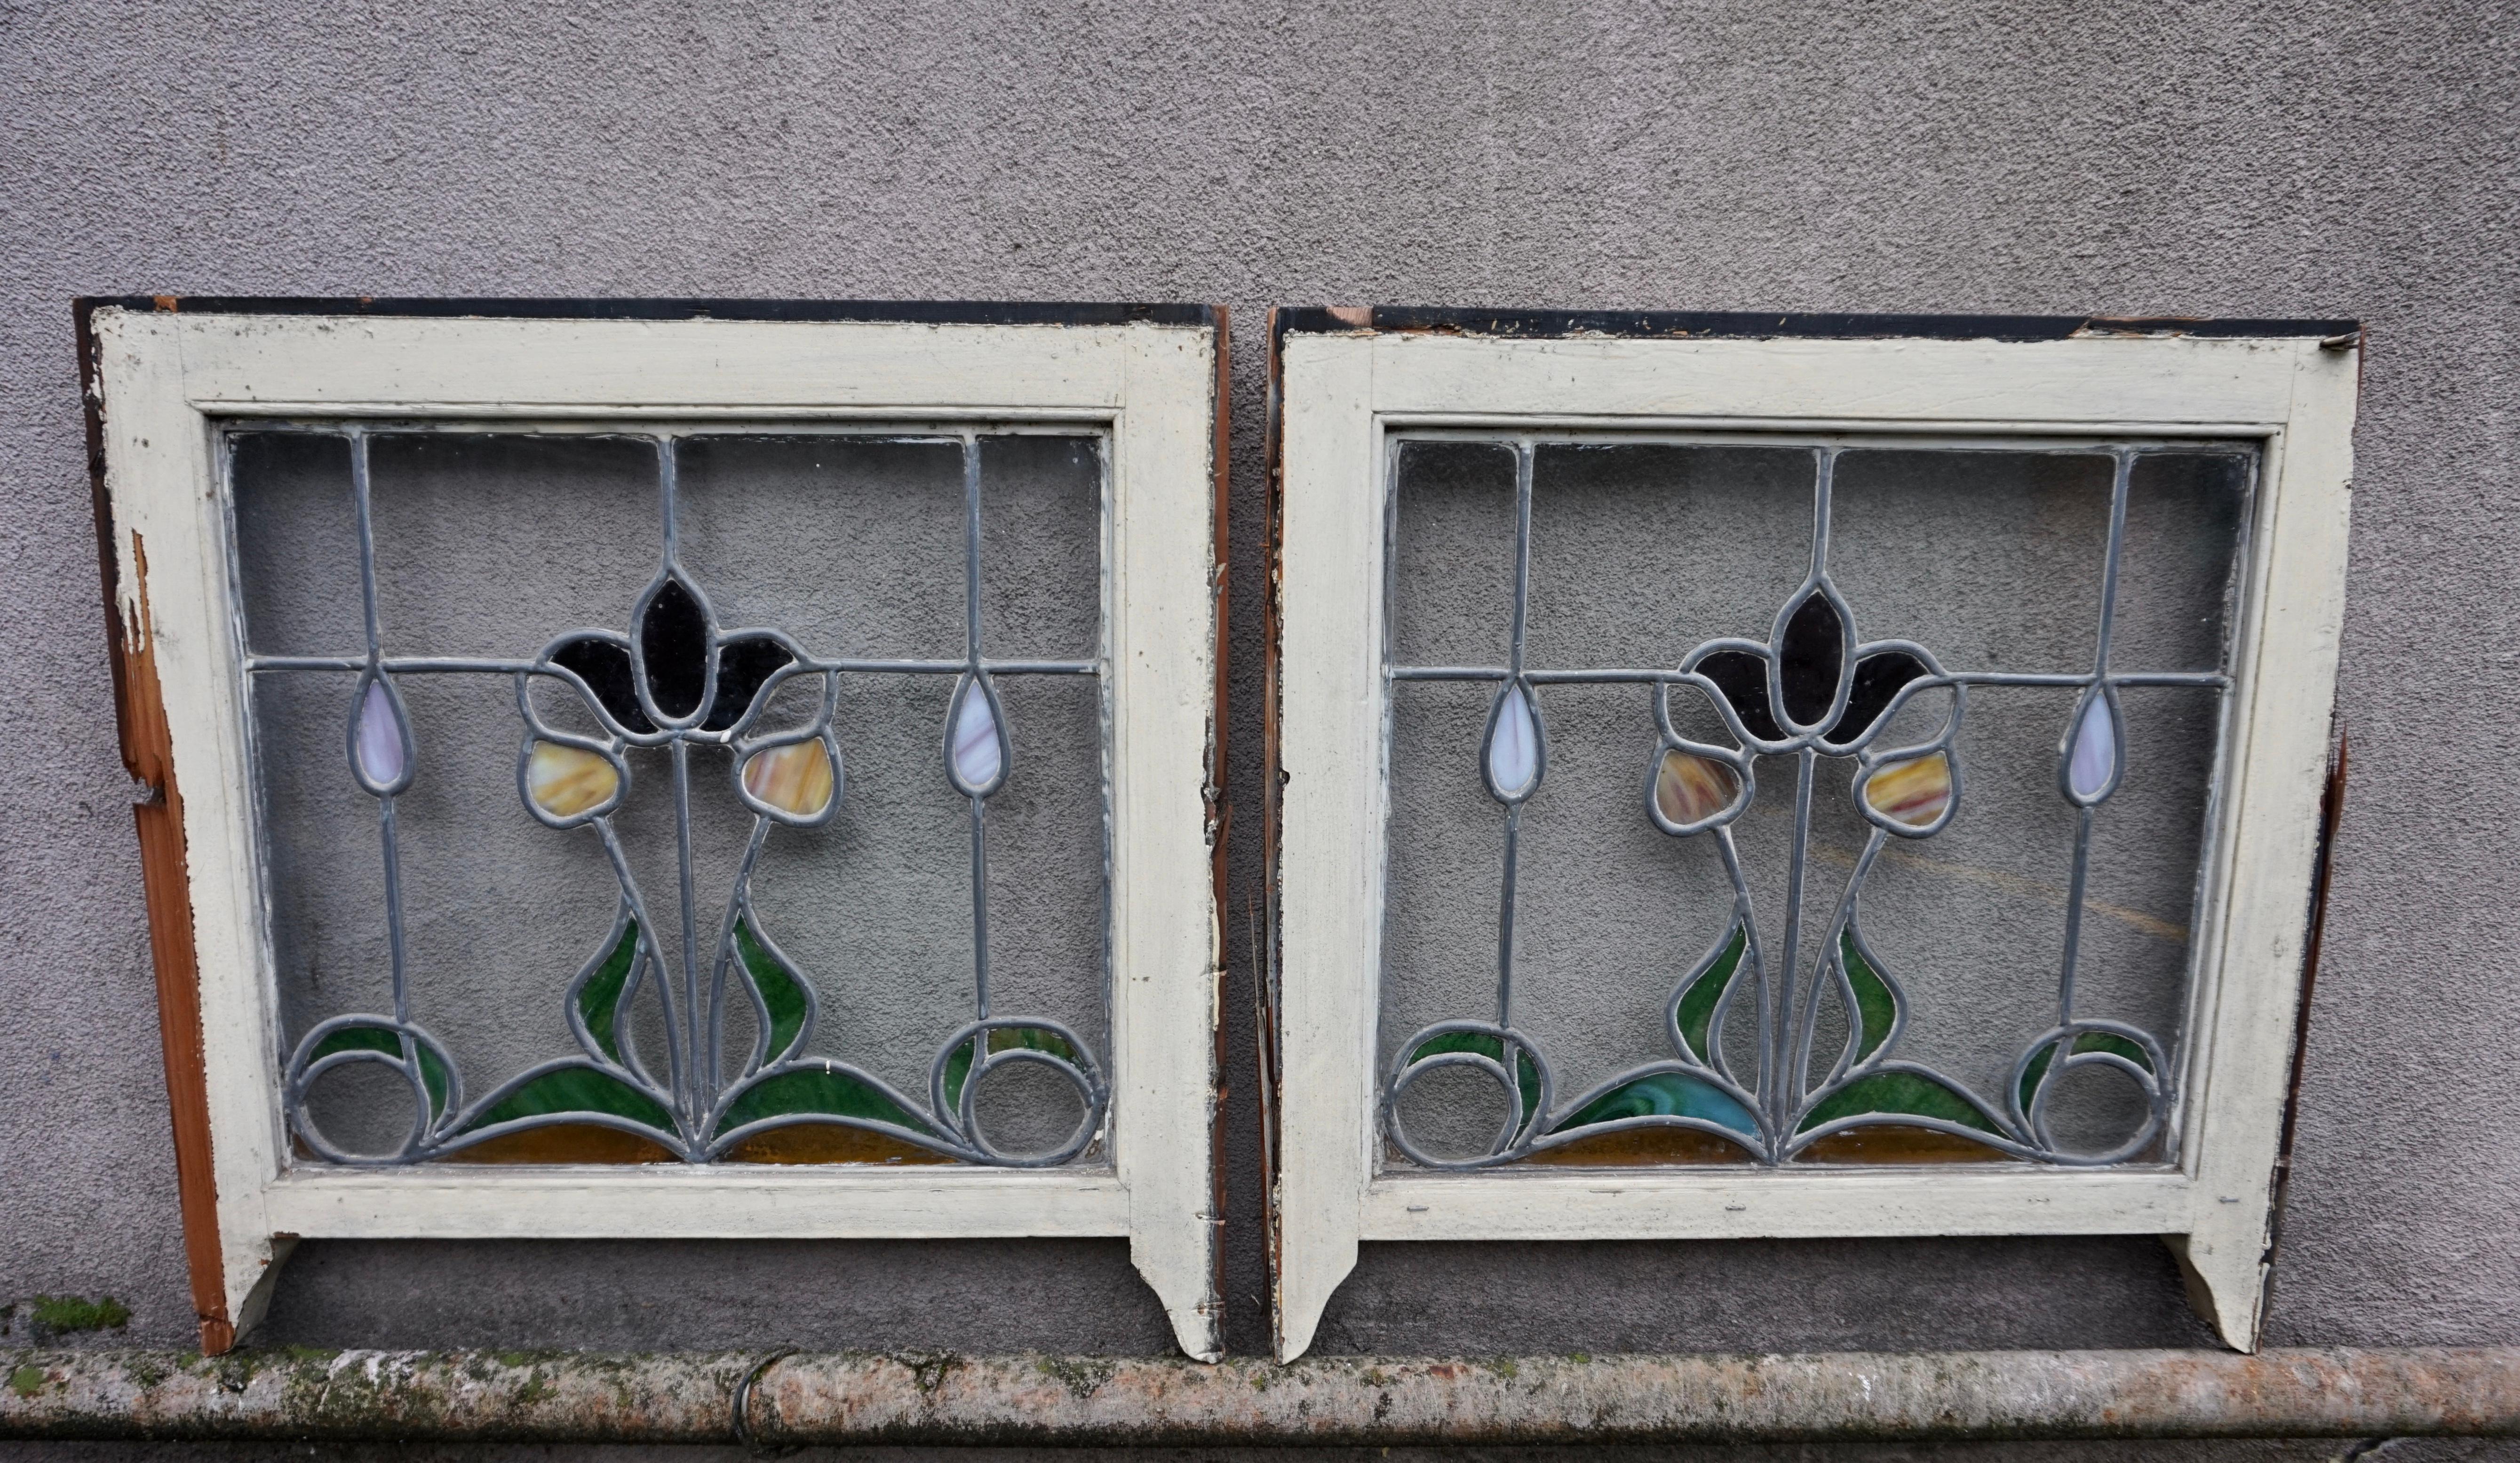 Pair Of Rare Art Nouveau Stain Glass Windows With Scrolling Tulip & Bud Motif For Sale 2